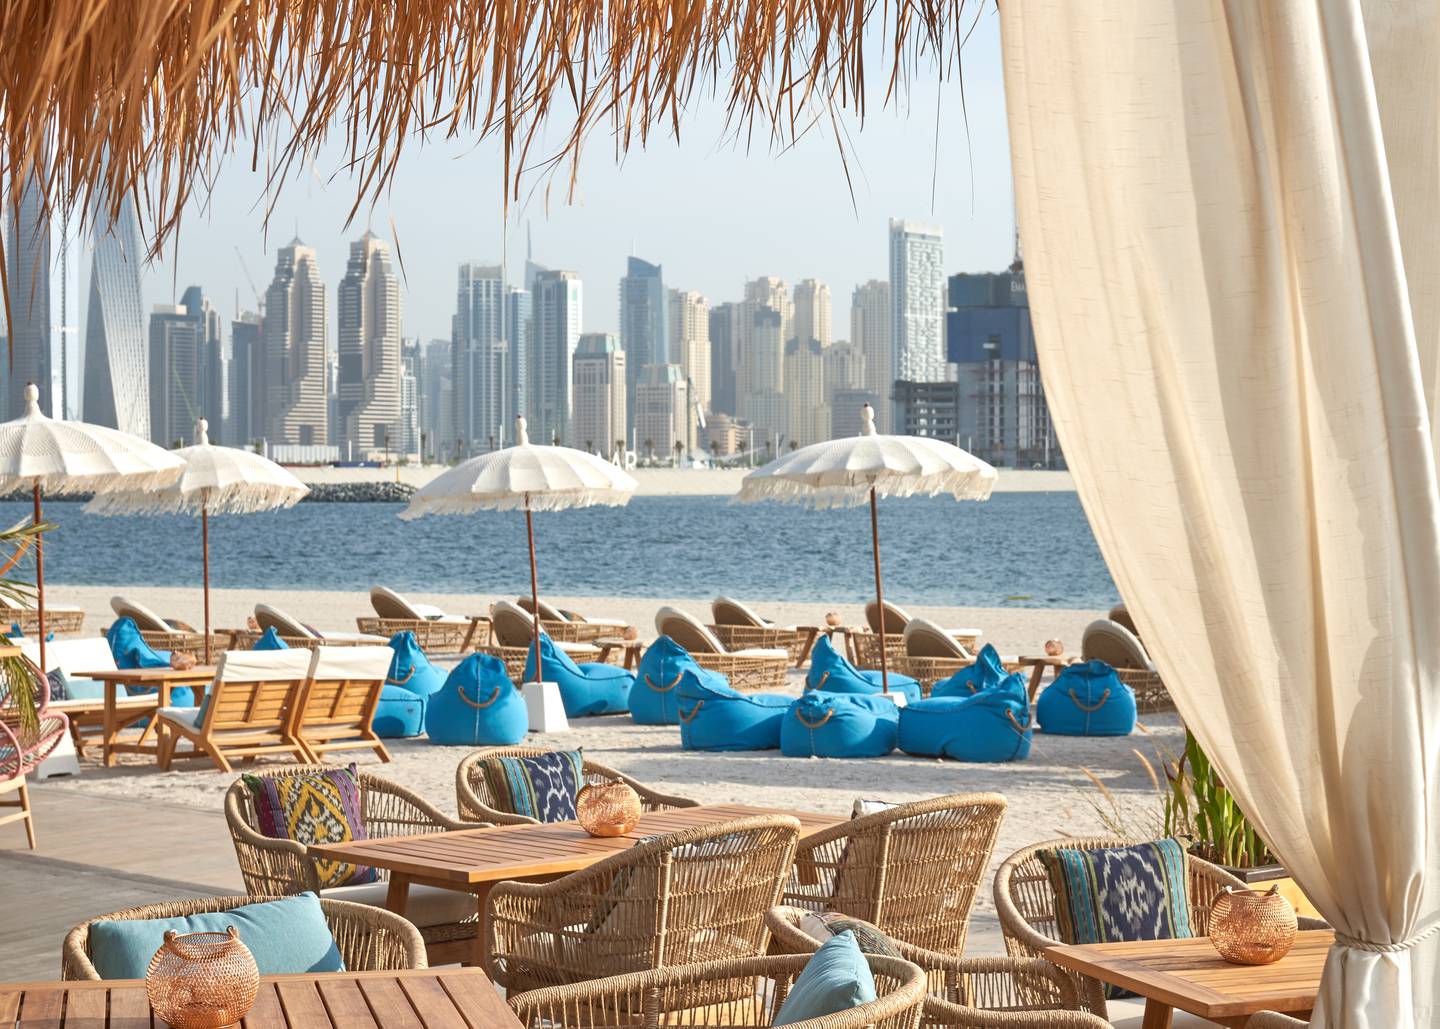 Koko Bay will host a beachfront dinner with excellent views of the fireworks from Palm Jumeirah. Photo: Koko Bay